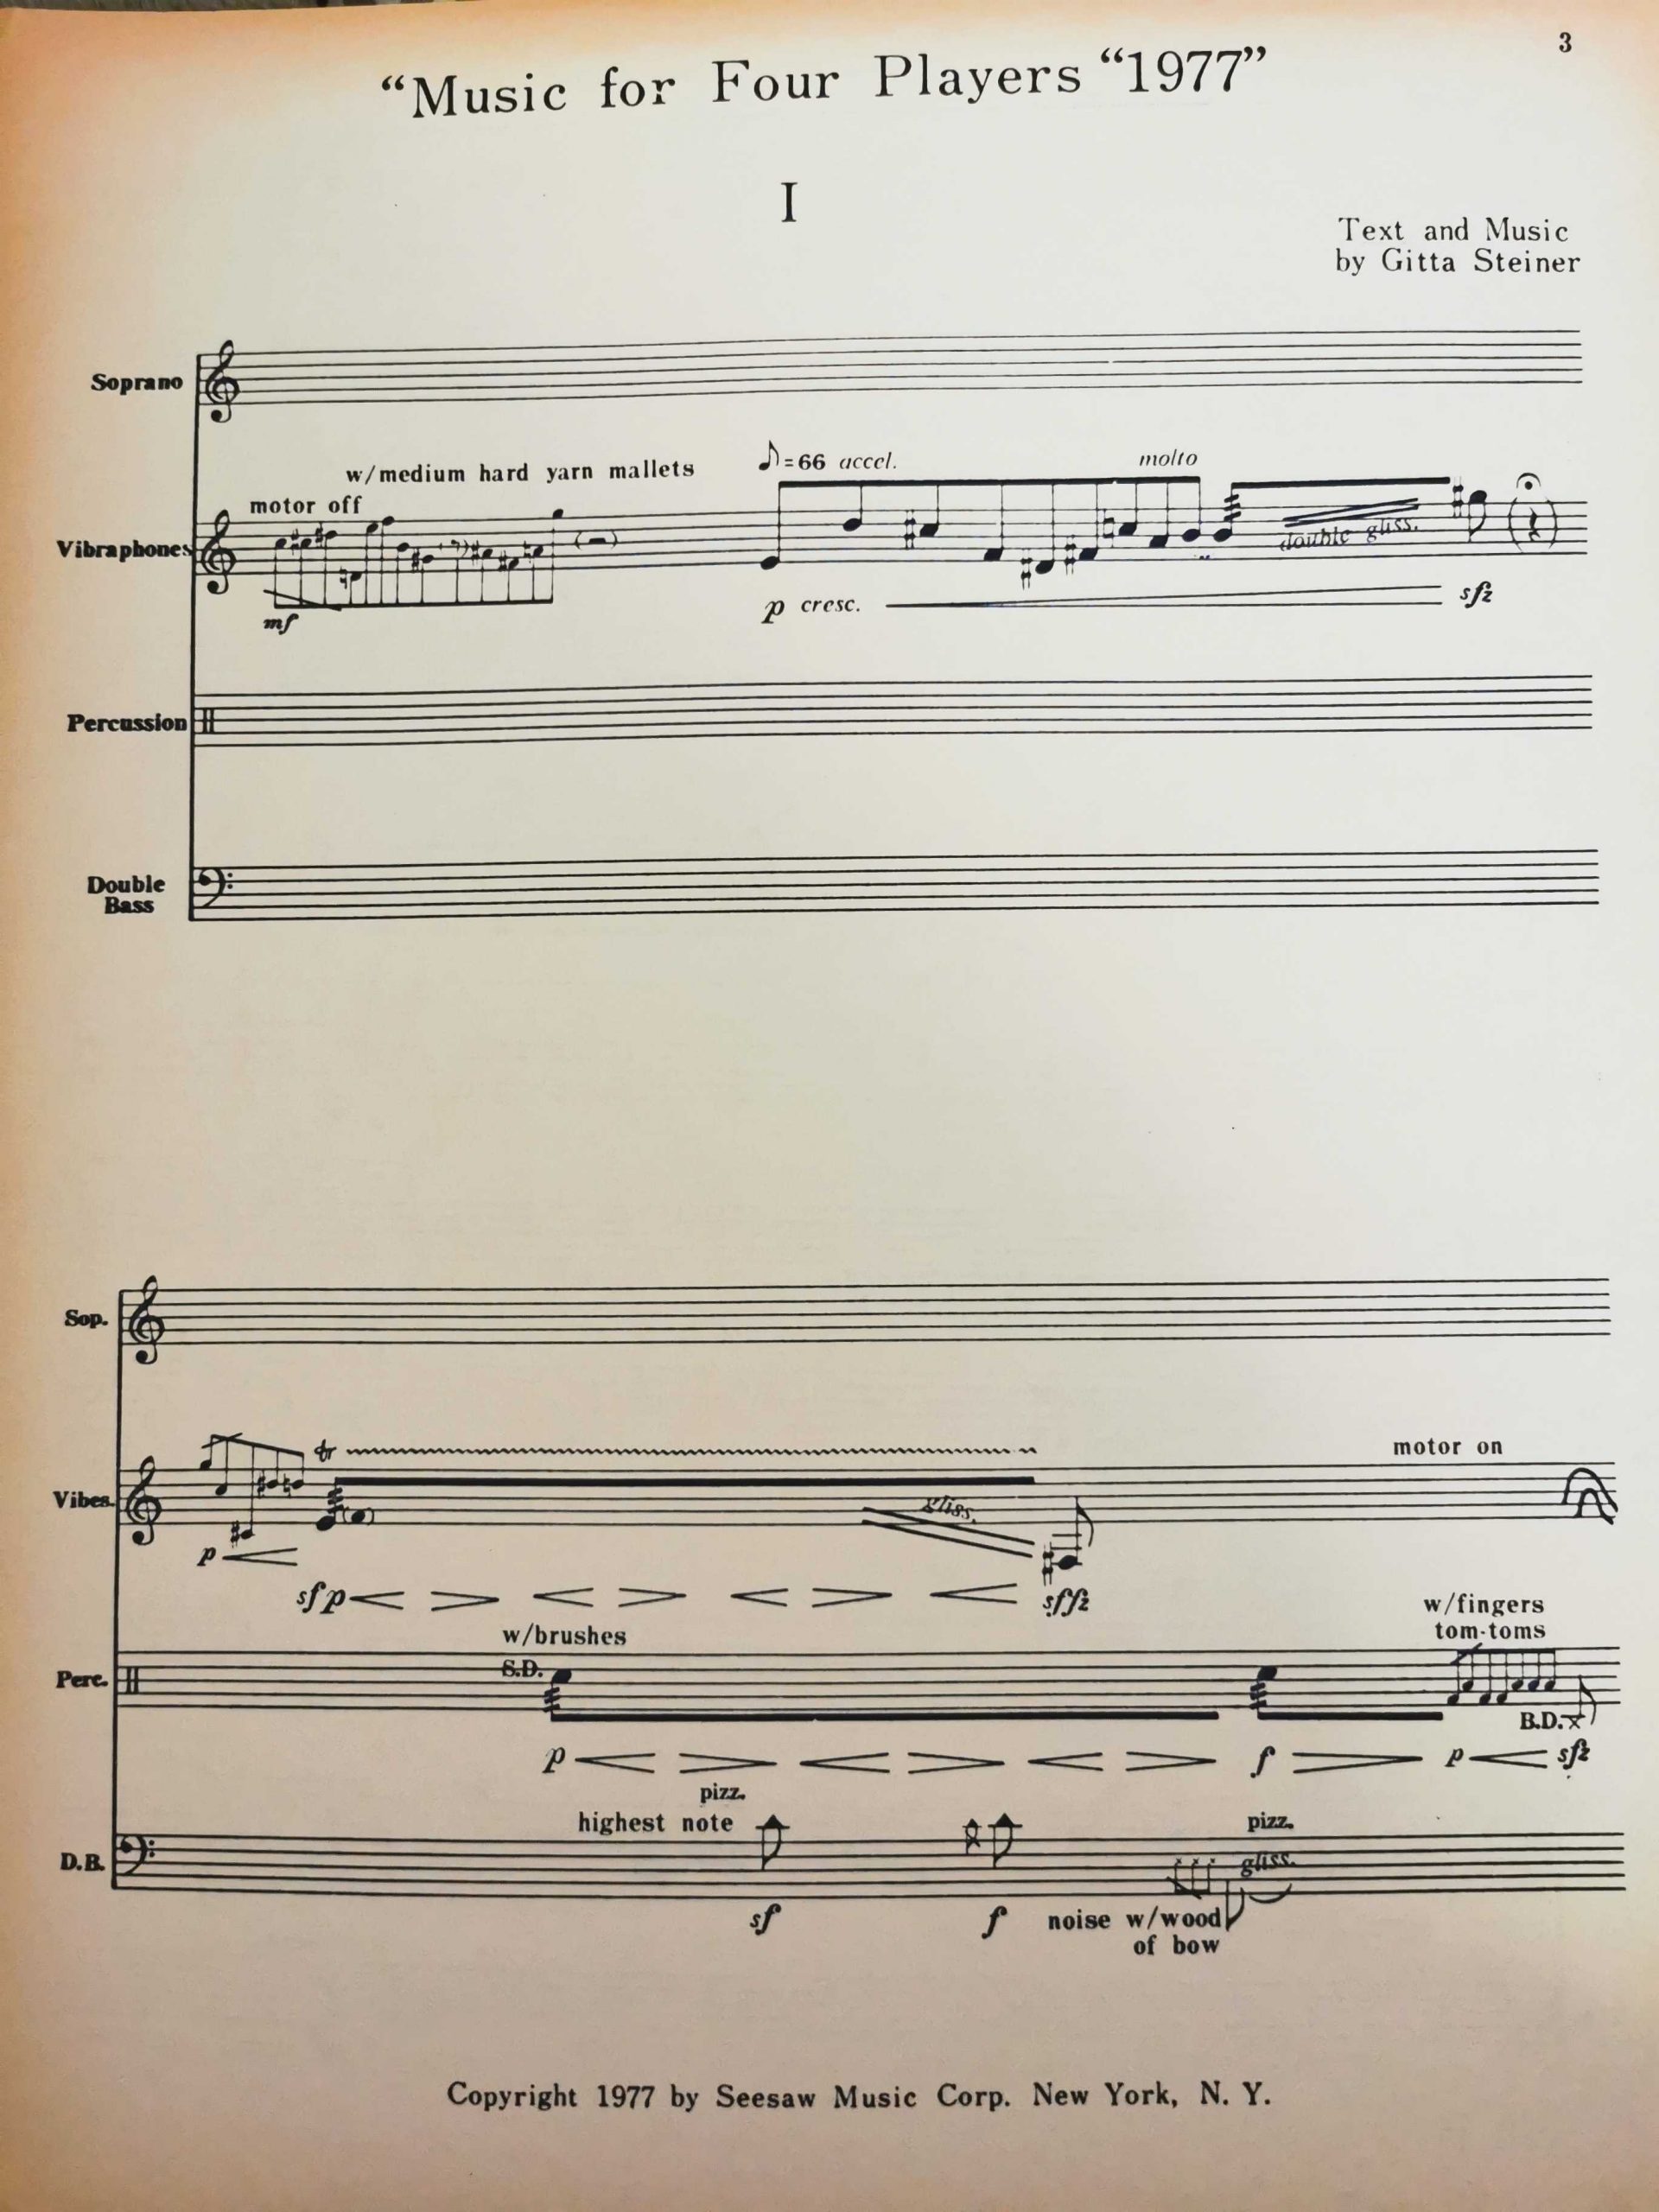 Music for Four Players 1977 by Gitta Steiner